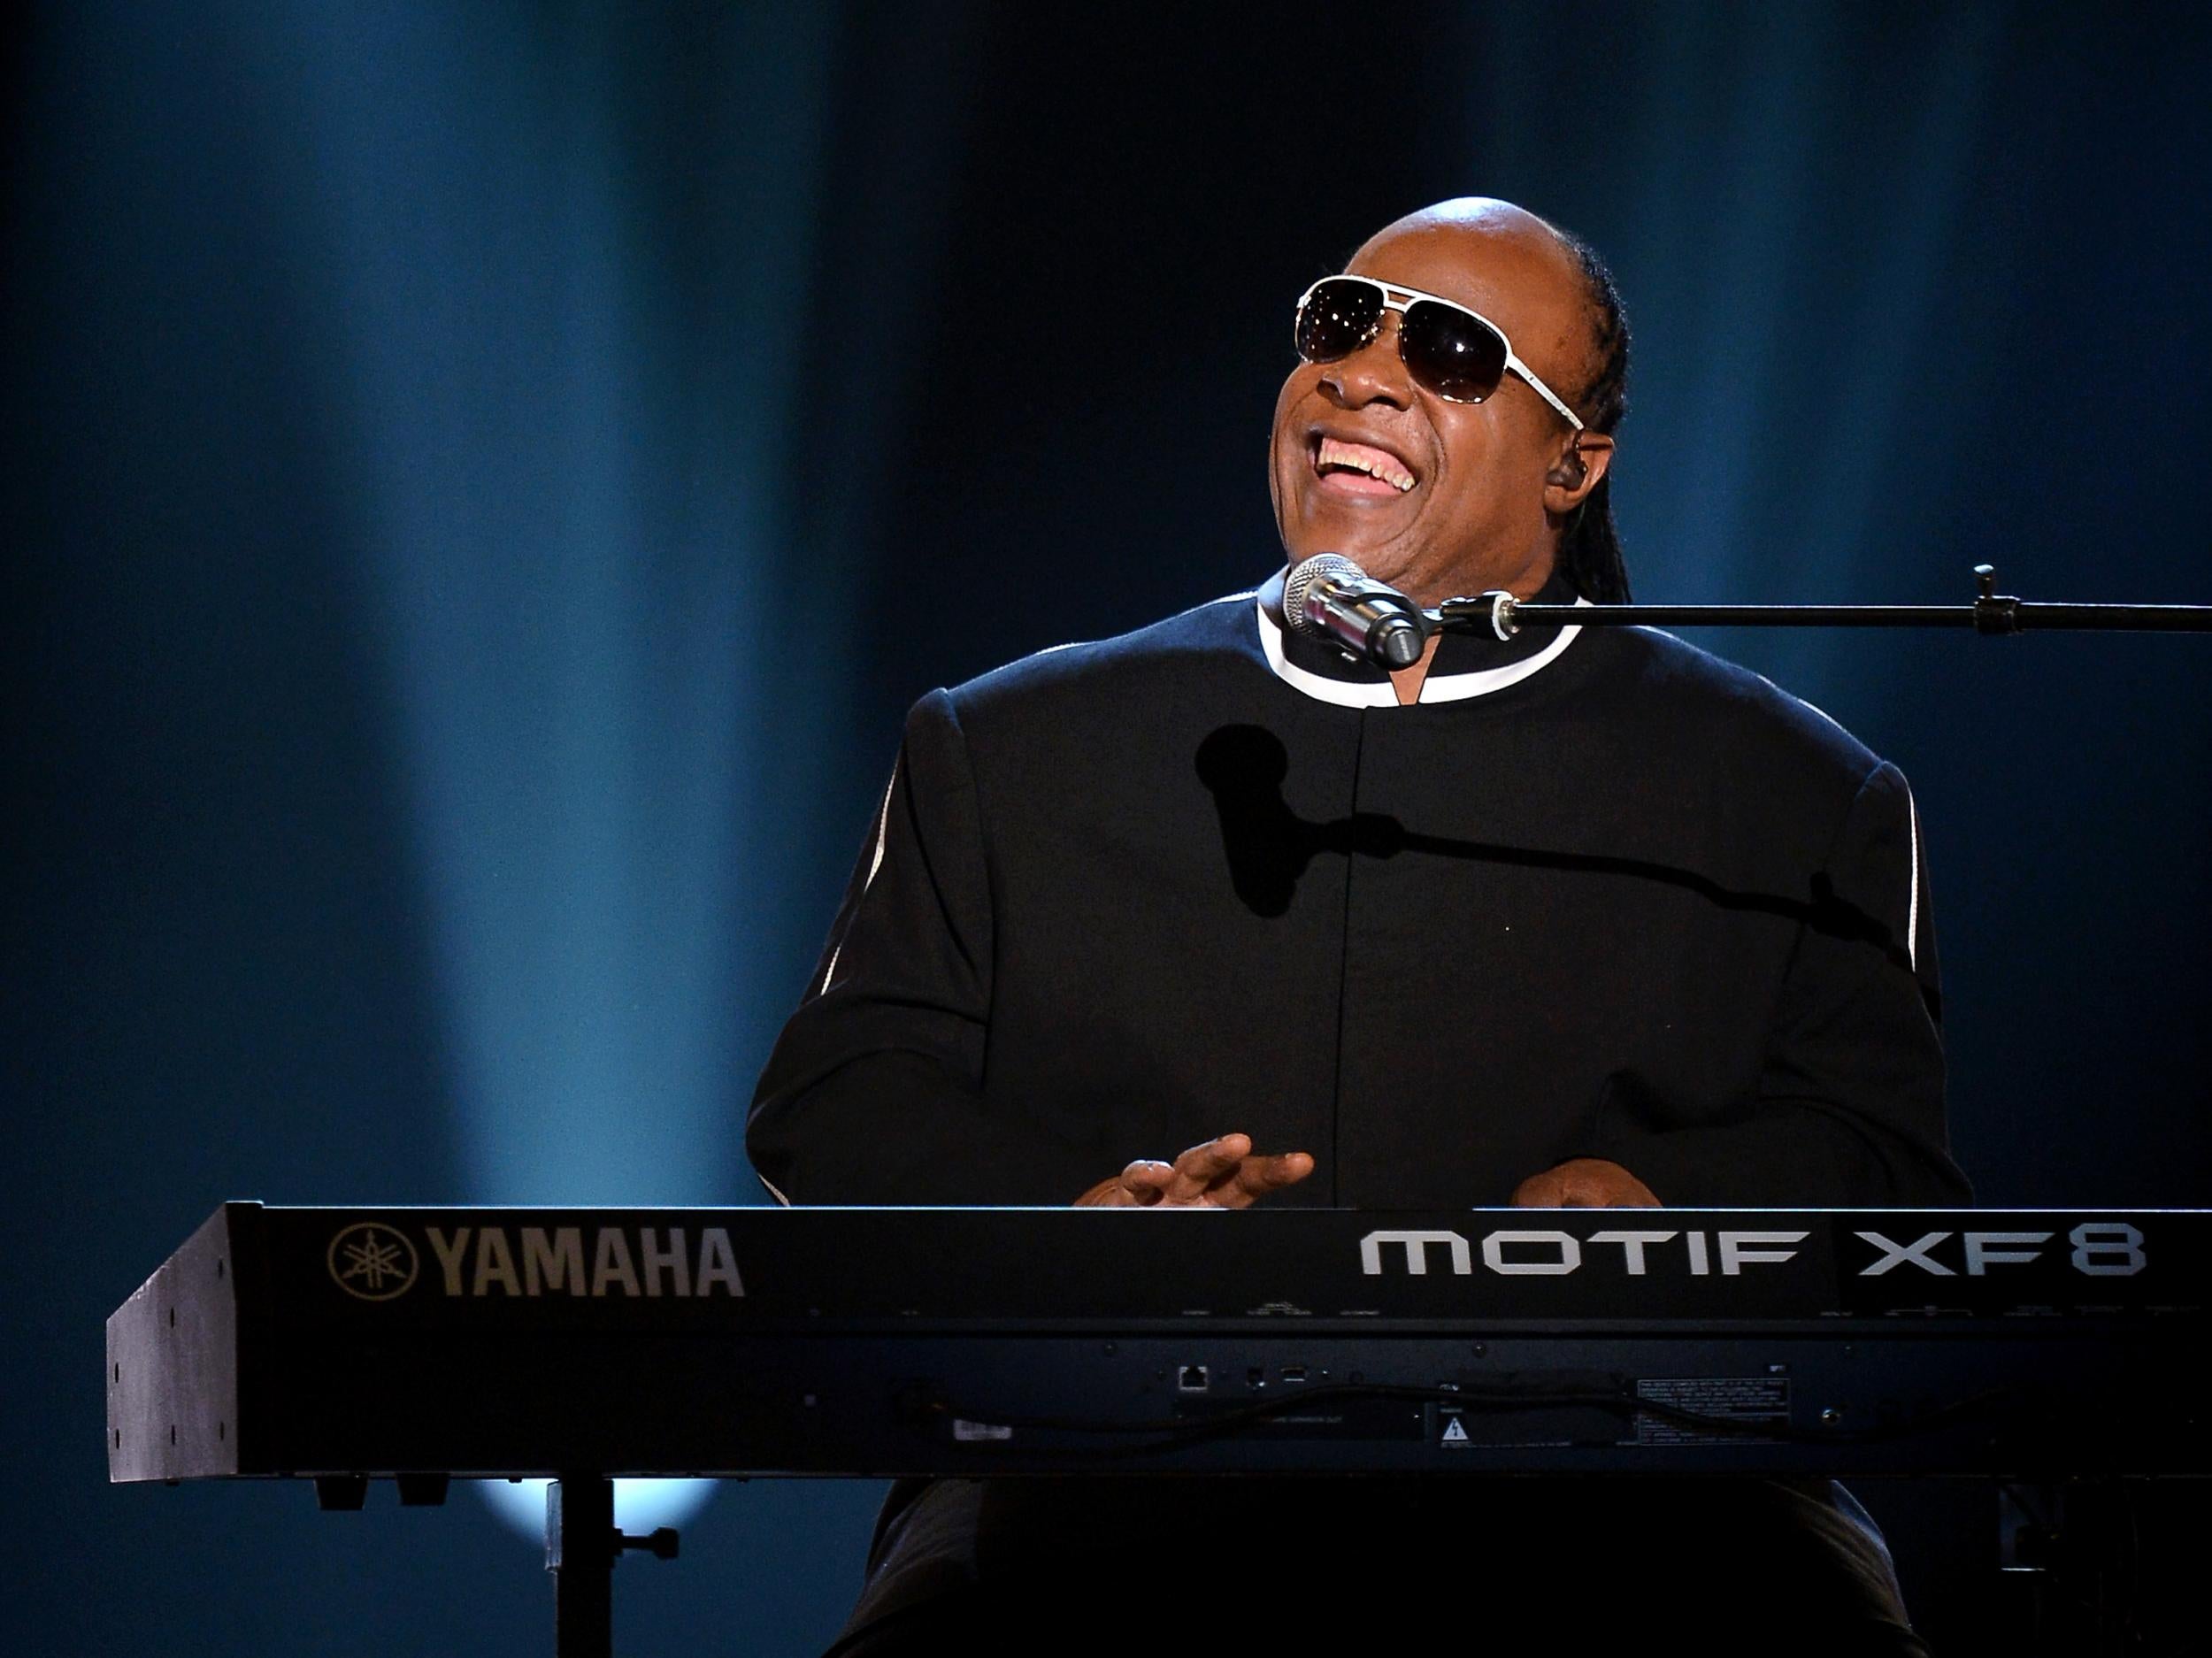 Higher Ground 2020 (Stevie Wonder), Playing For Change